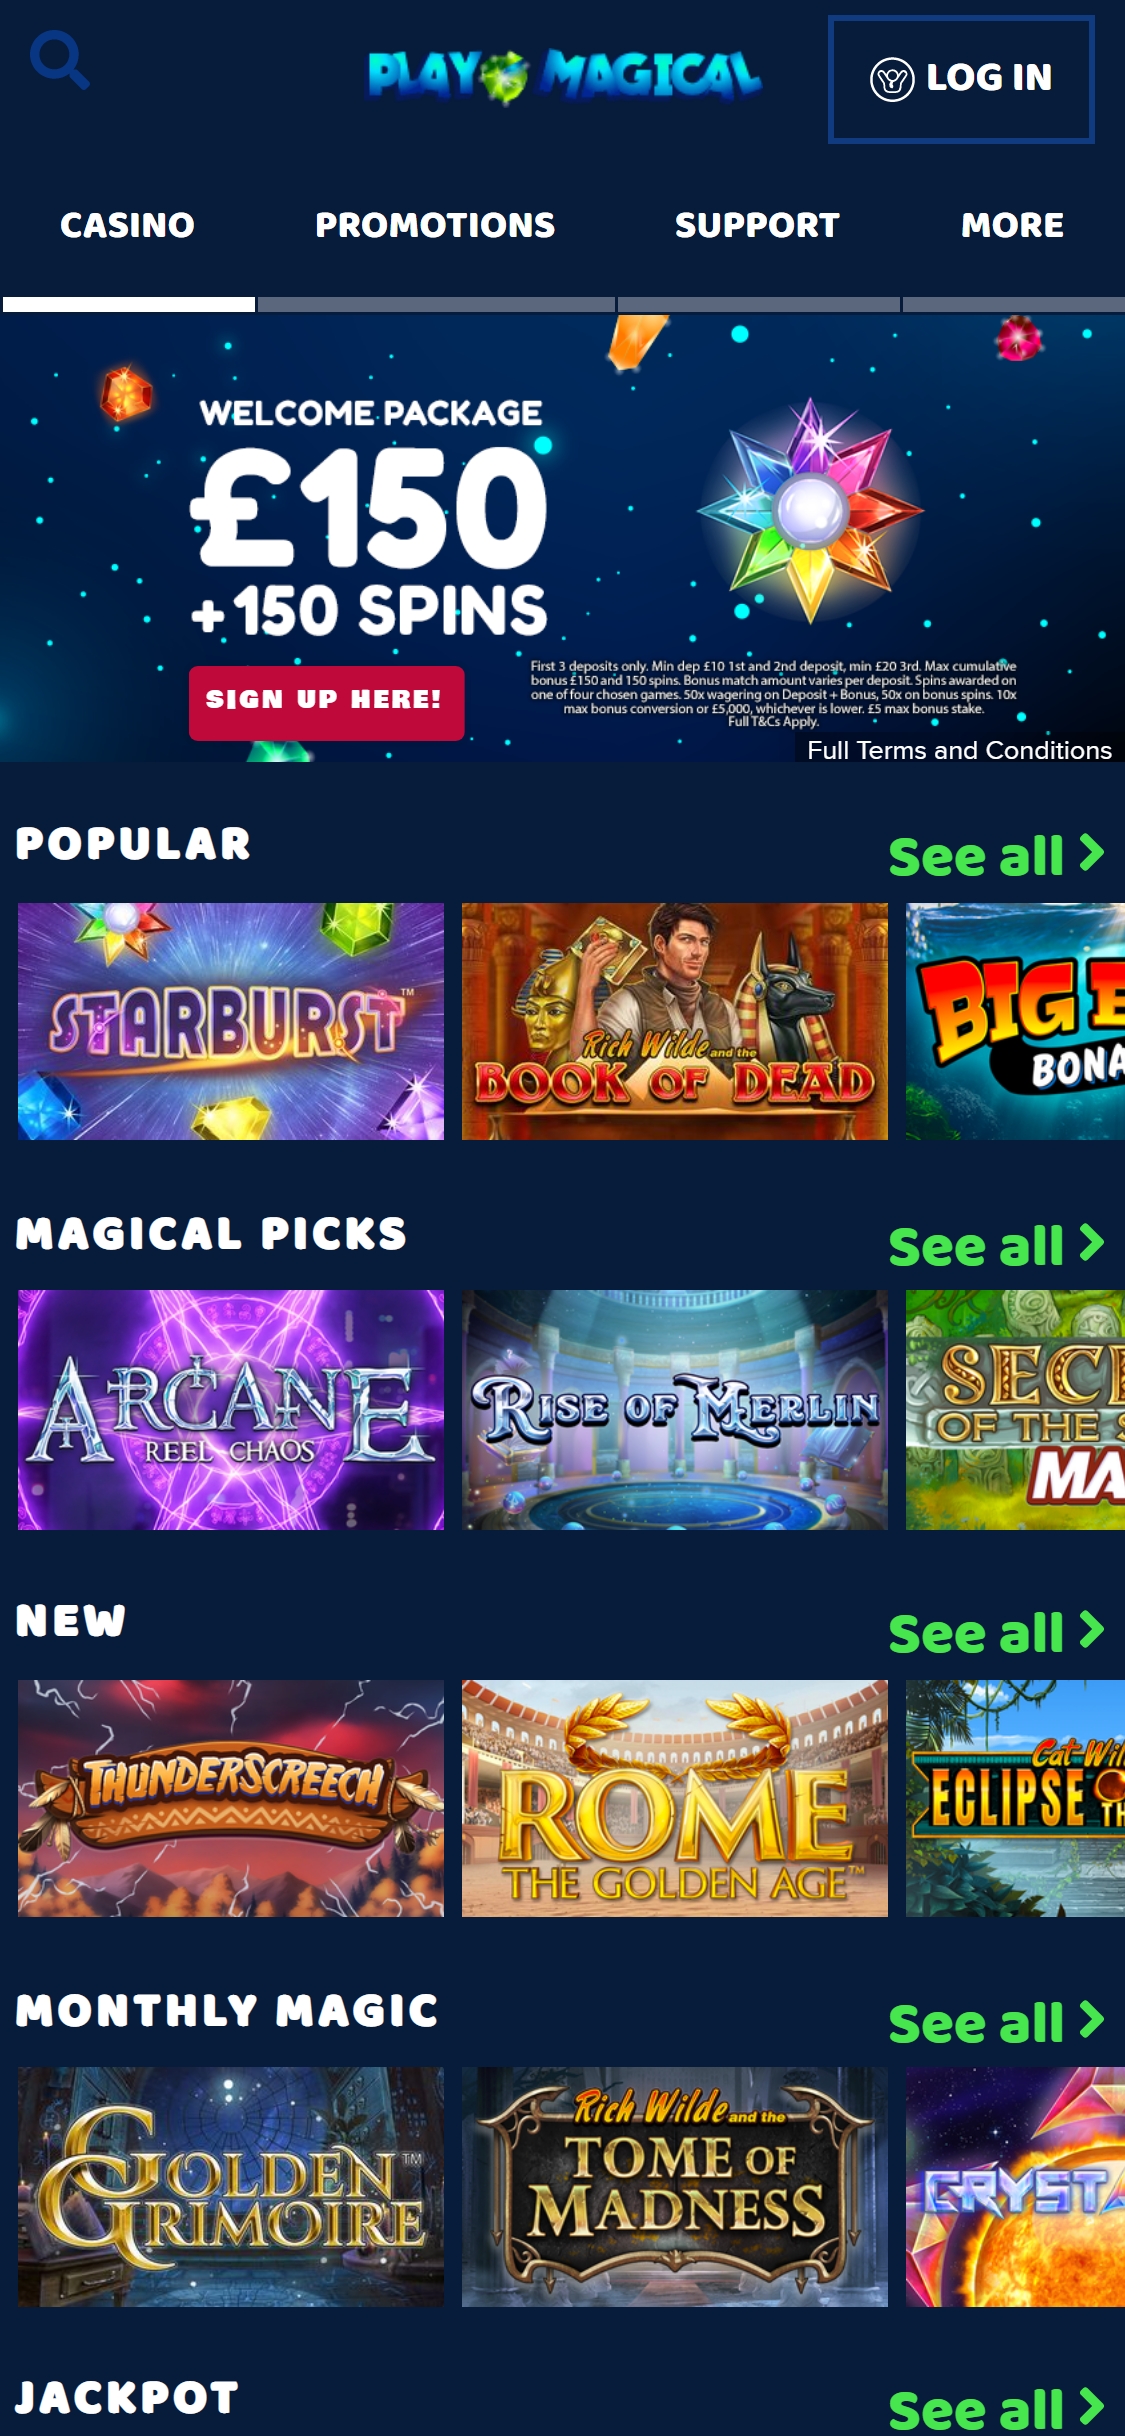 Play Magical Casino Mobile Review